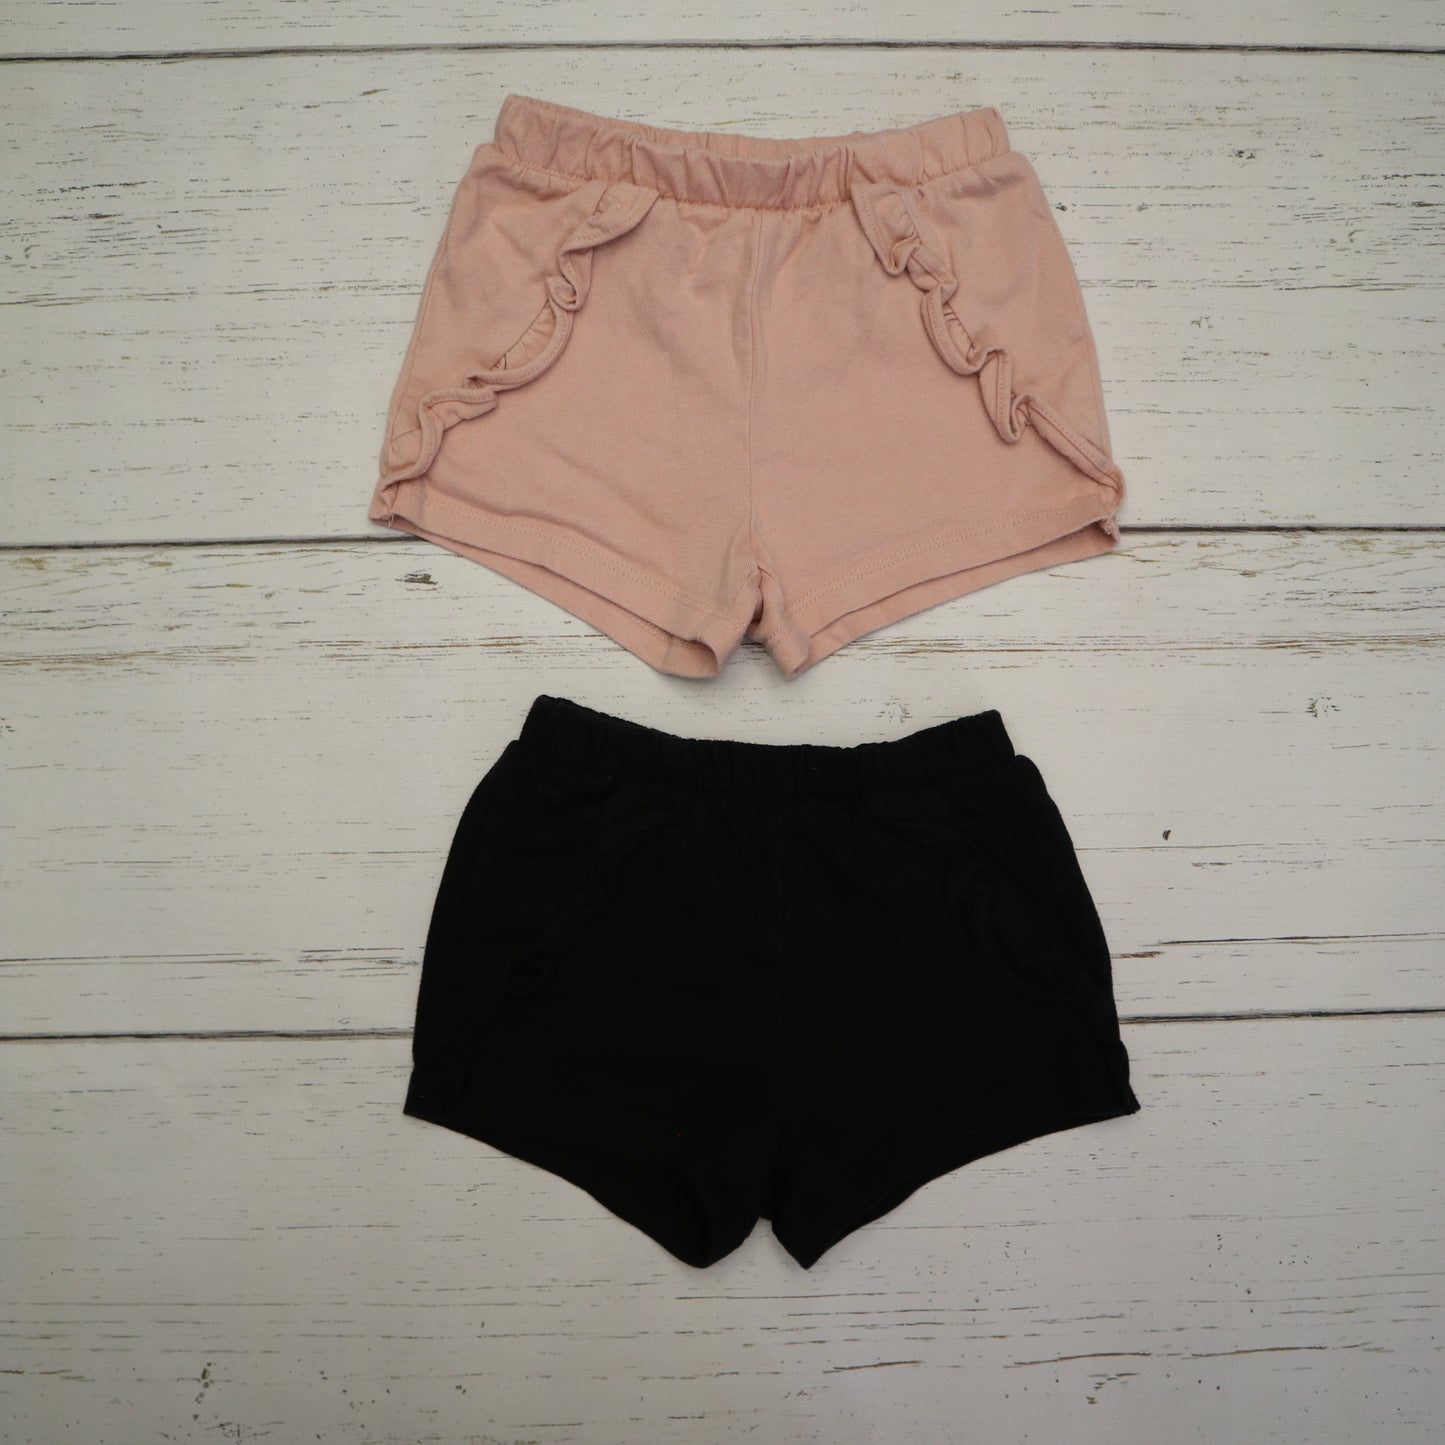 The Children's Place - Shorts (2T)